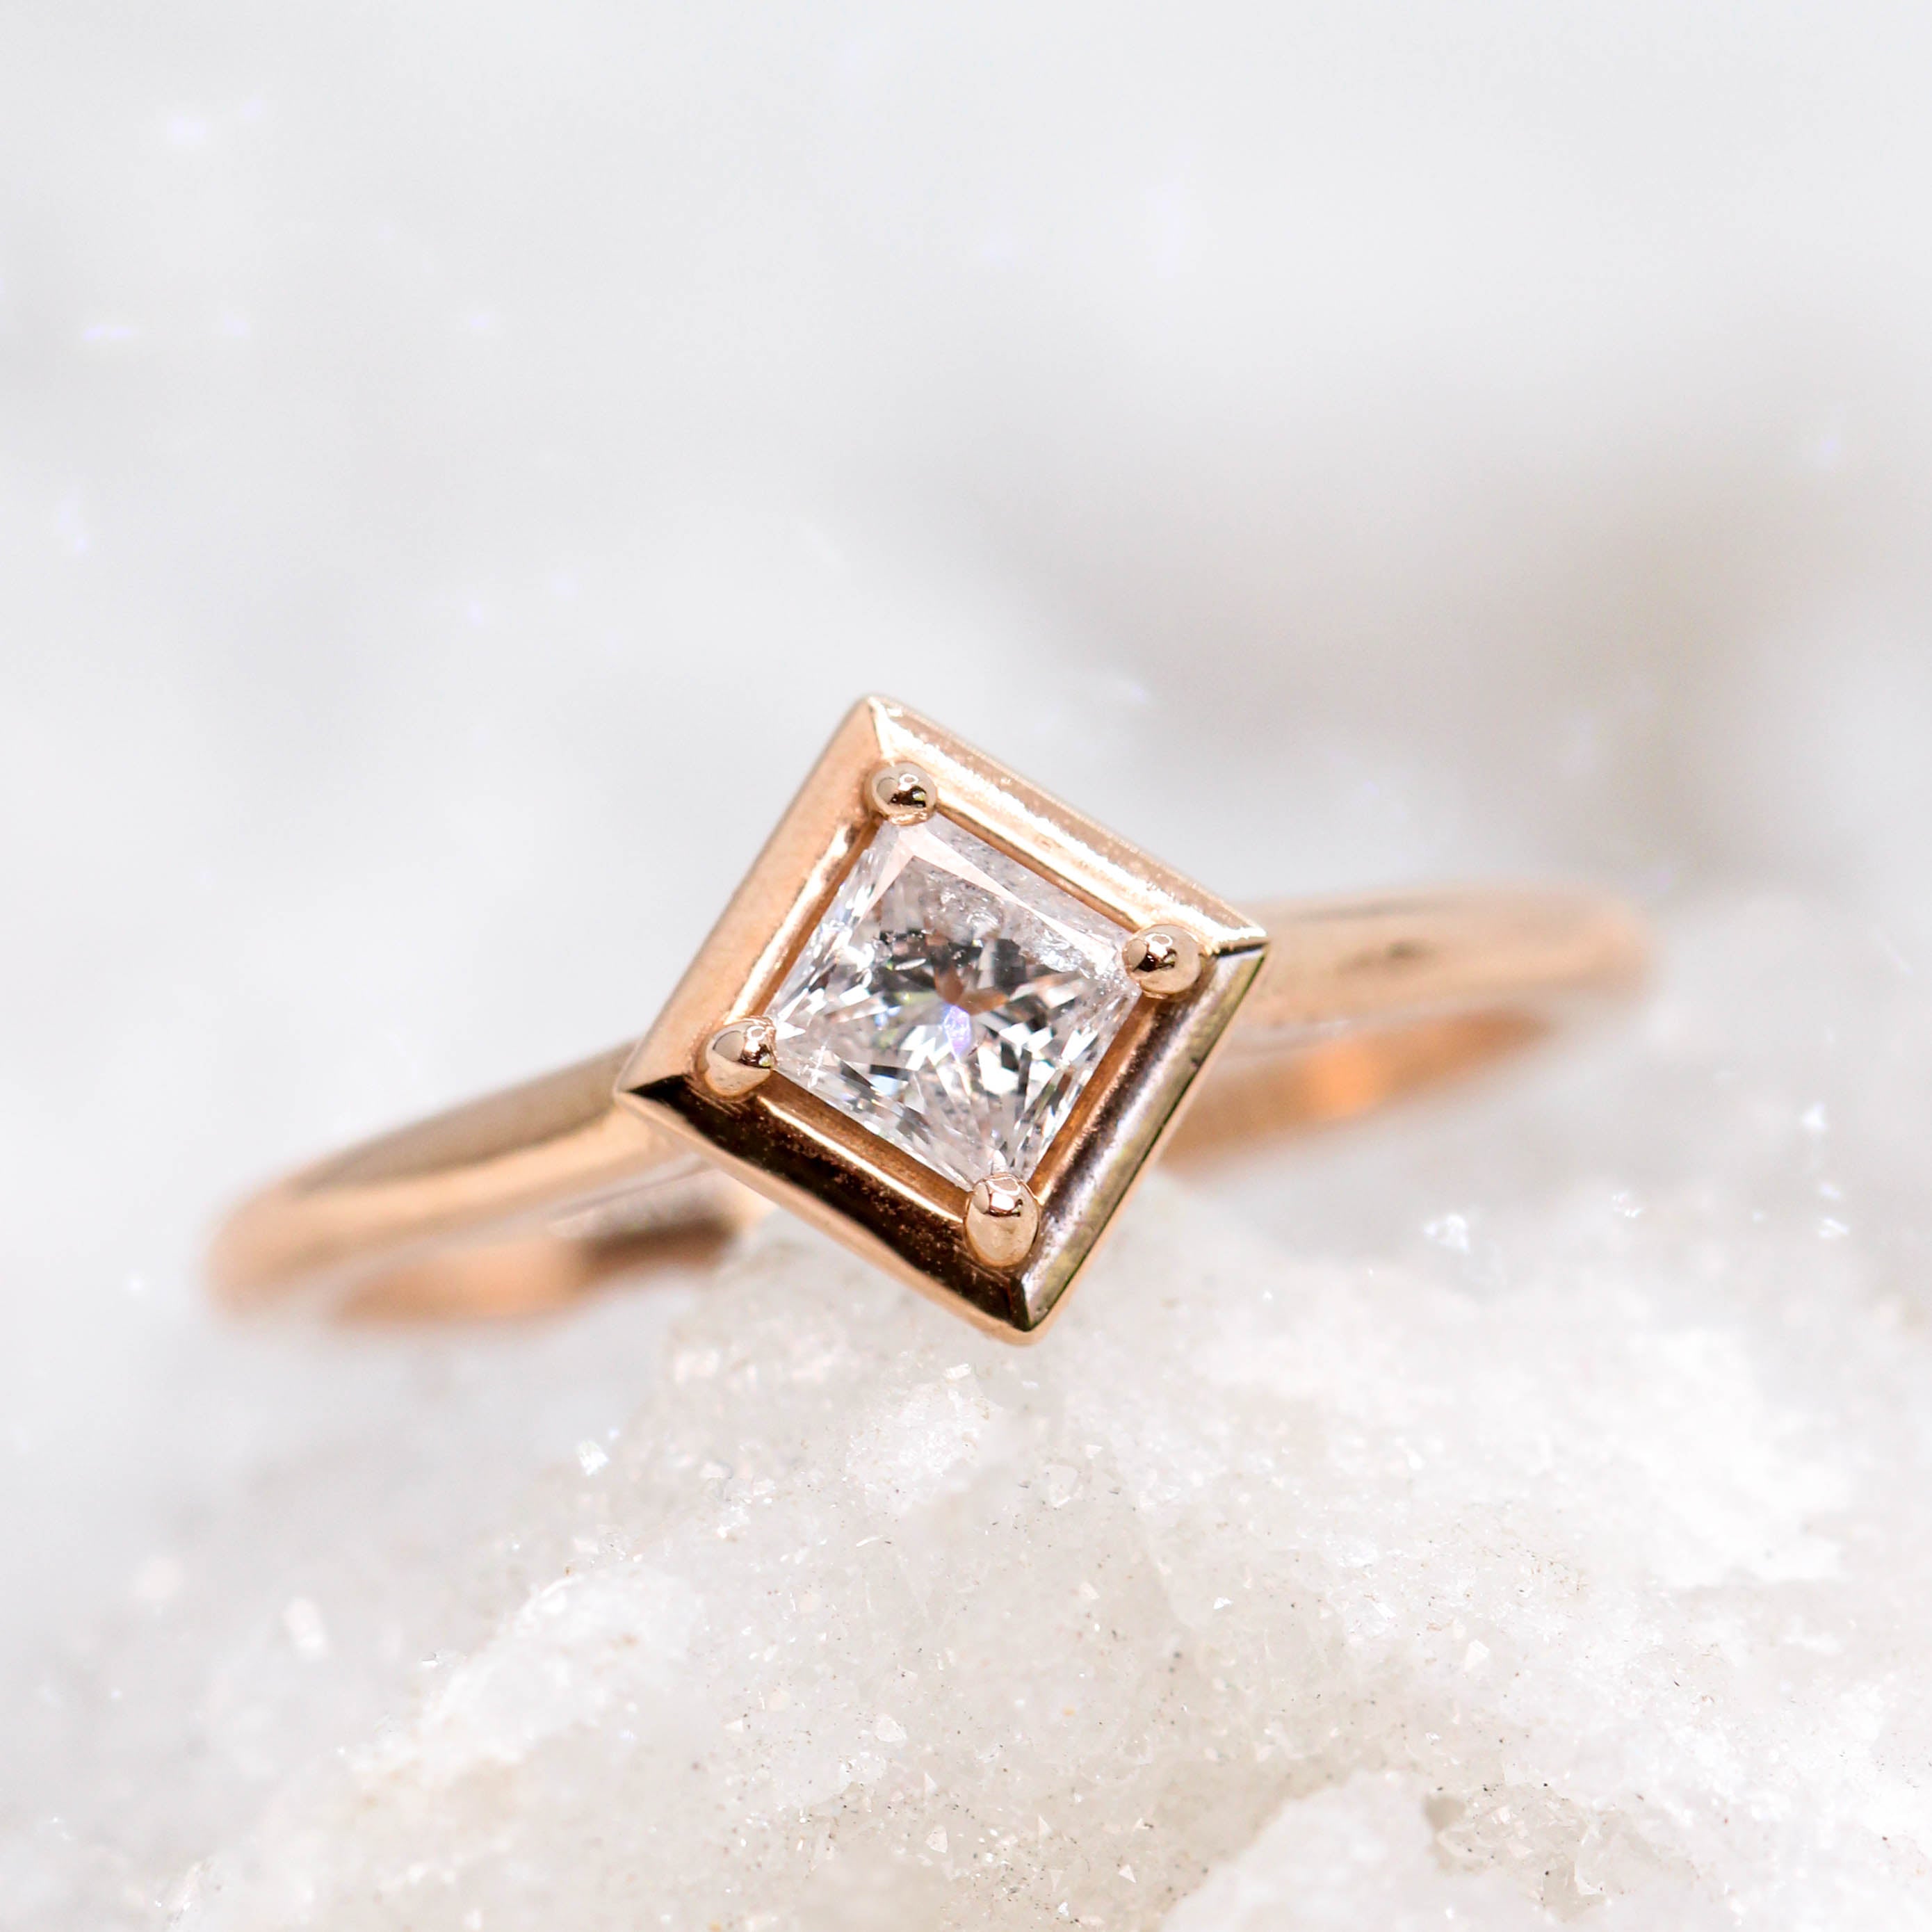 Rosemary Solitaire Ring with .40ct princess cut Diamond - 14k rose gold - Ready to Size and Ship - Midwinter Co. Alternative Bridal Rings and Modern Fine Jewelry